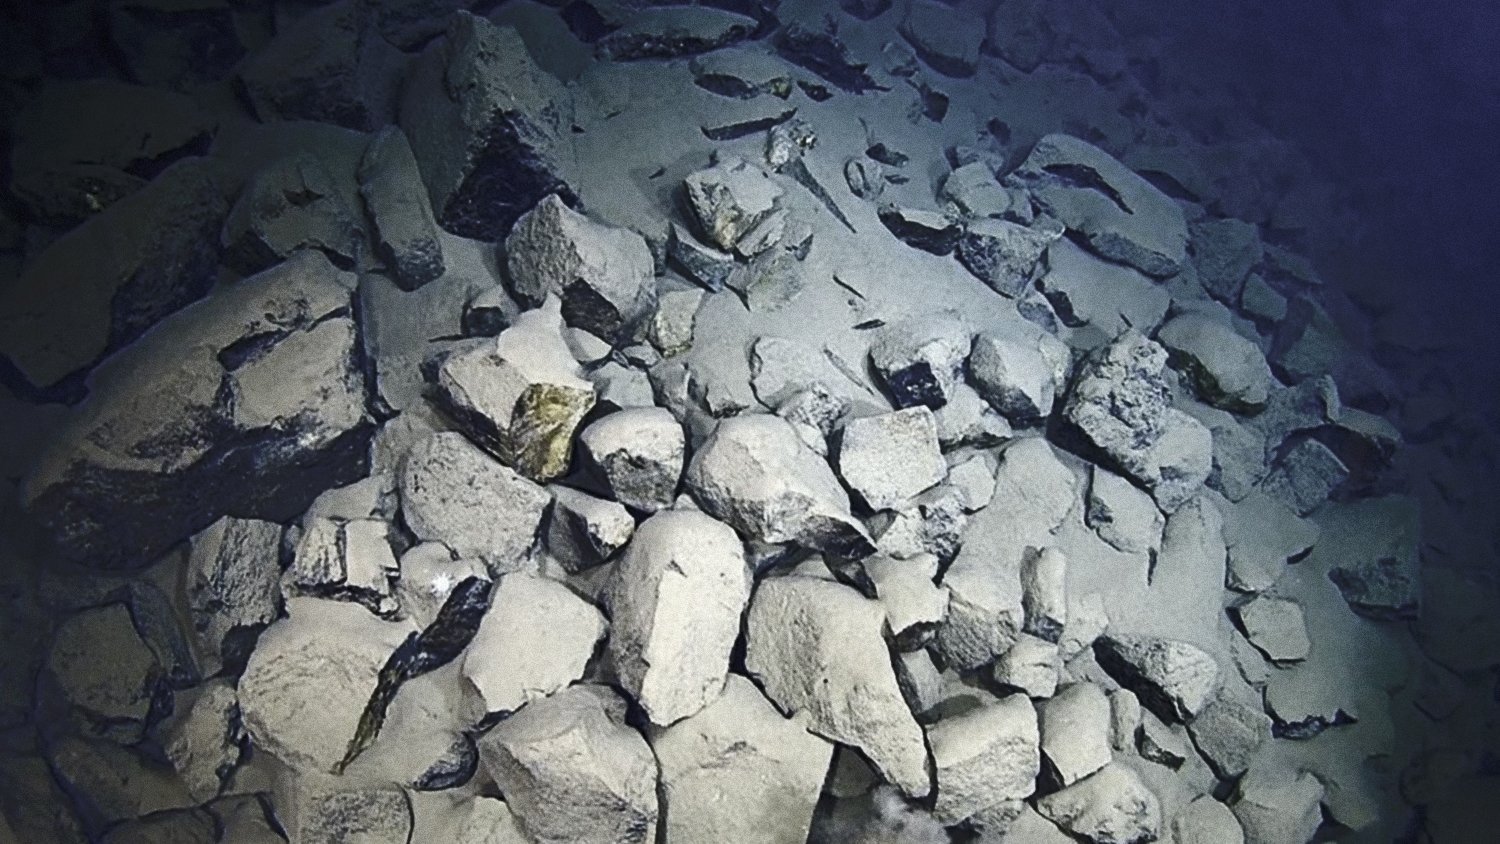  Chunky basaltic rocks seen on the seafloor, which Dawn aptly names the area “Flintstones quarry” 